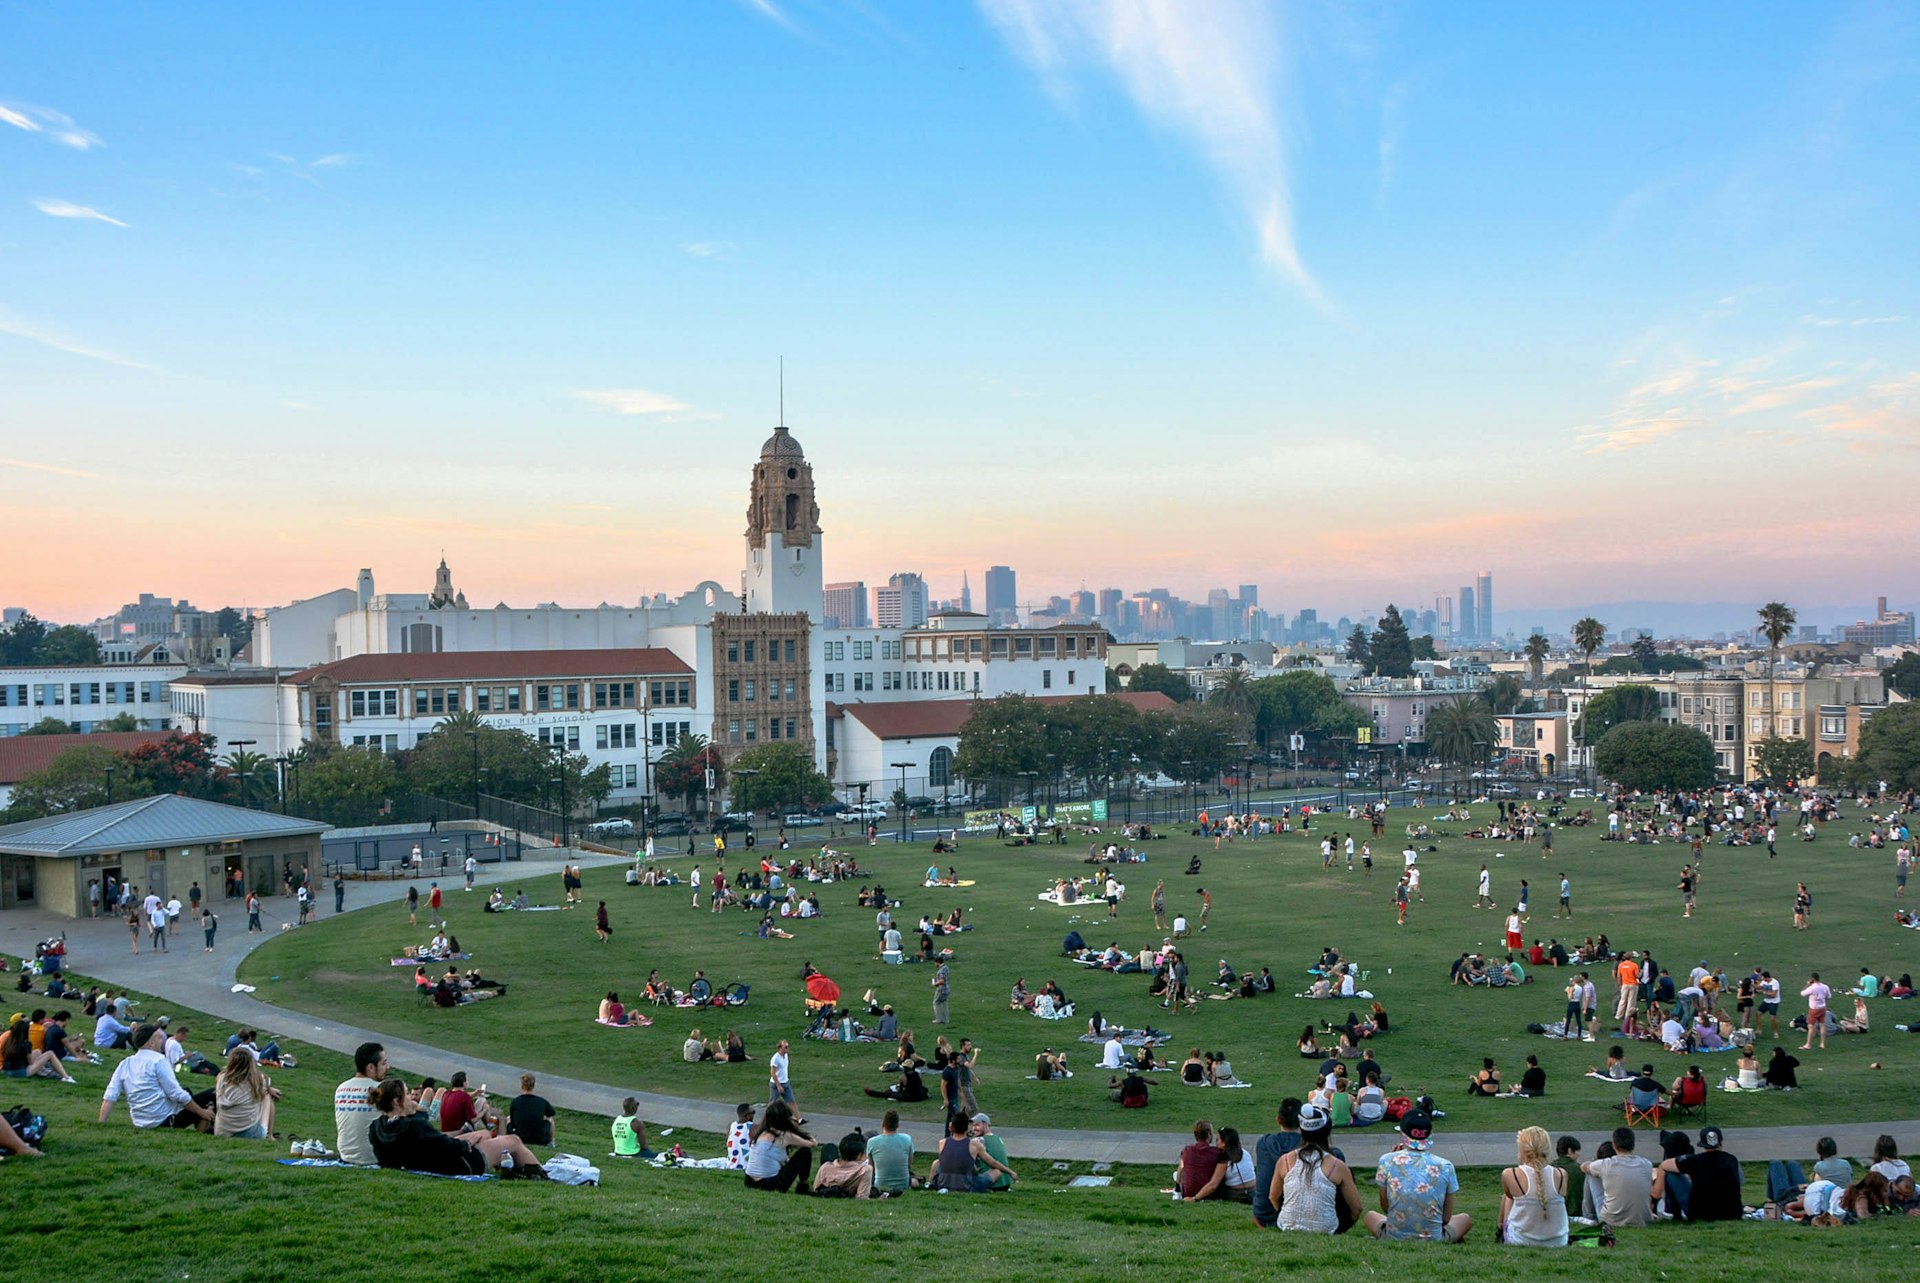 Groups of people relax on grass in a park with a city view as the sun sets